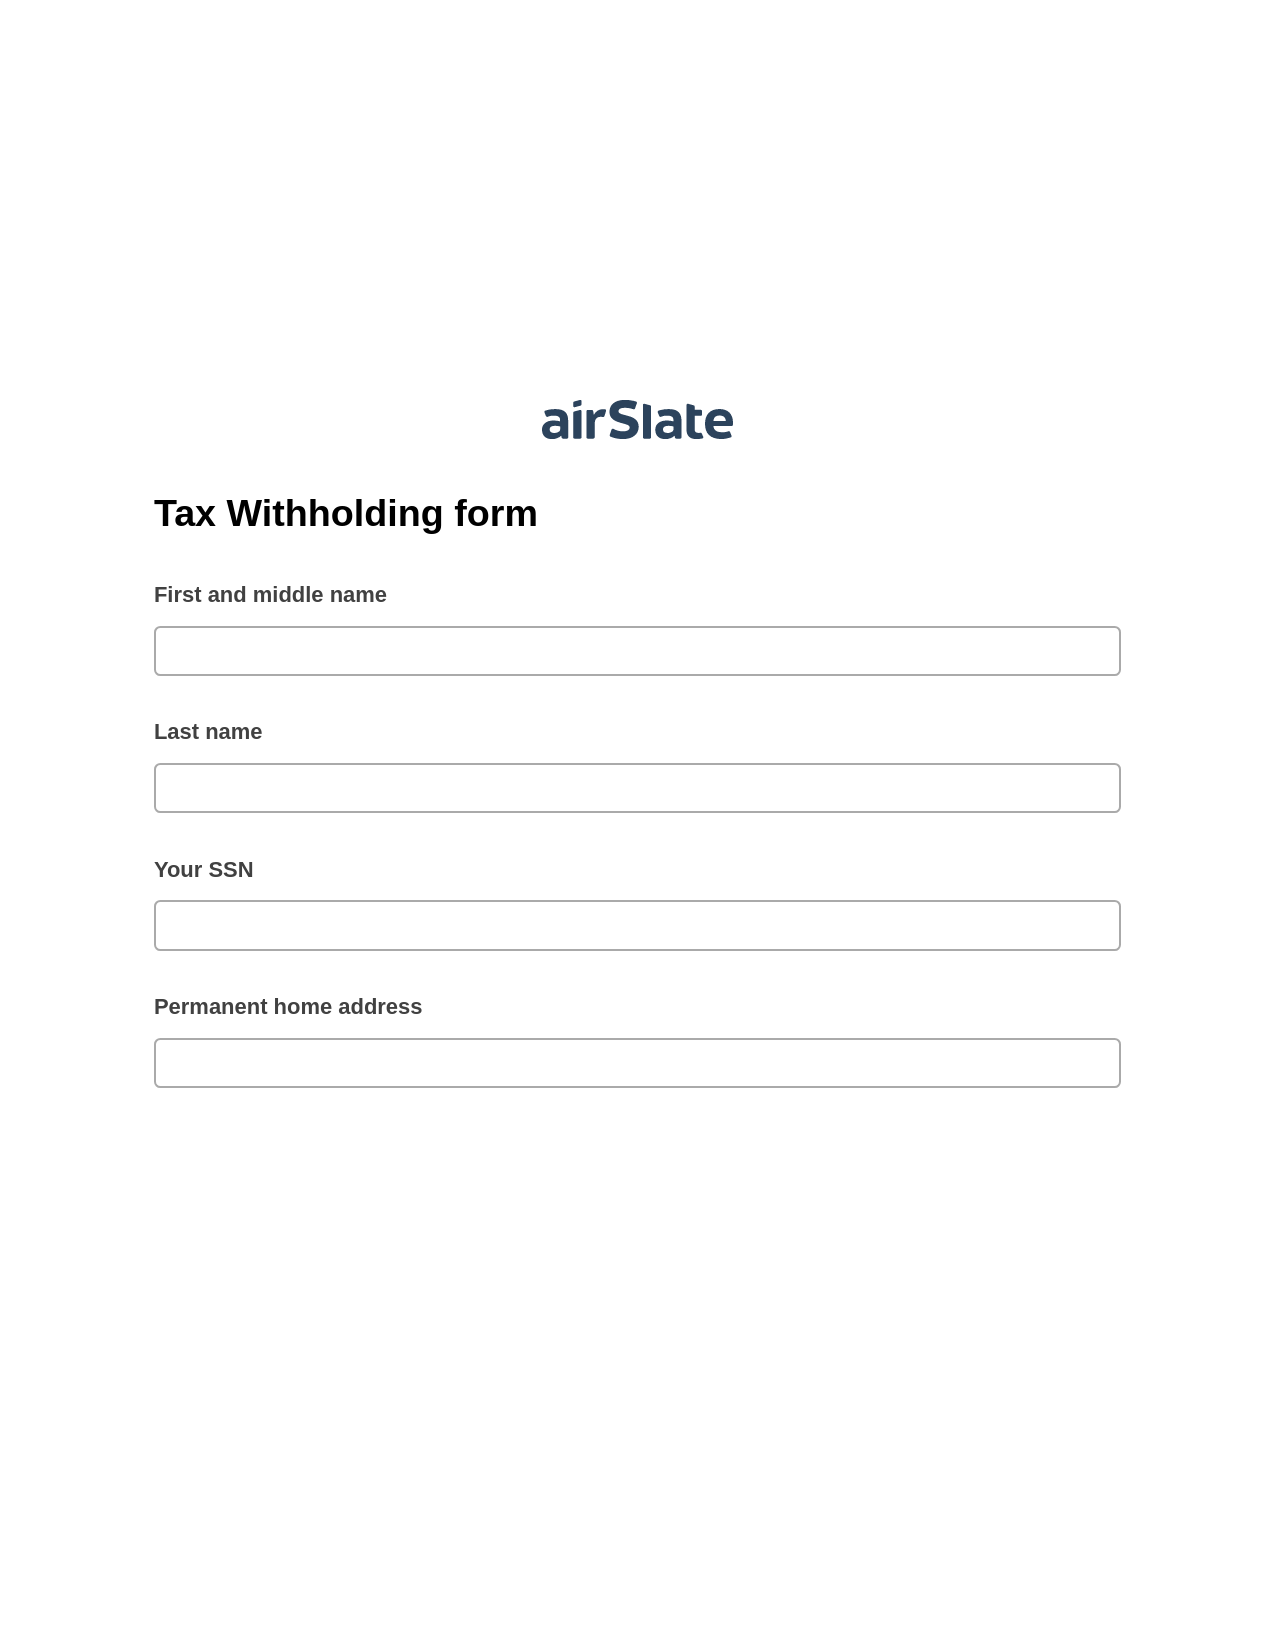 Multirole Tax Withholding form Pre-fill Slate from MS Dynamics 365 Records Bot, Google Cloud Print Bot, Slack Two-Way Binding Bot